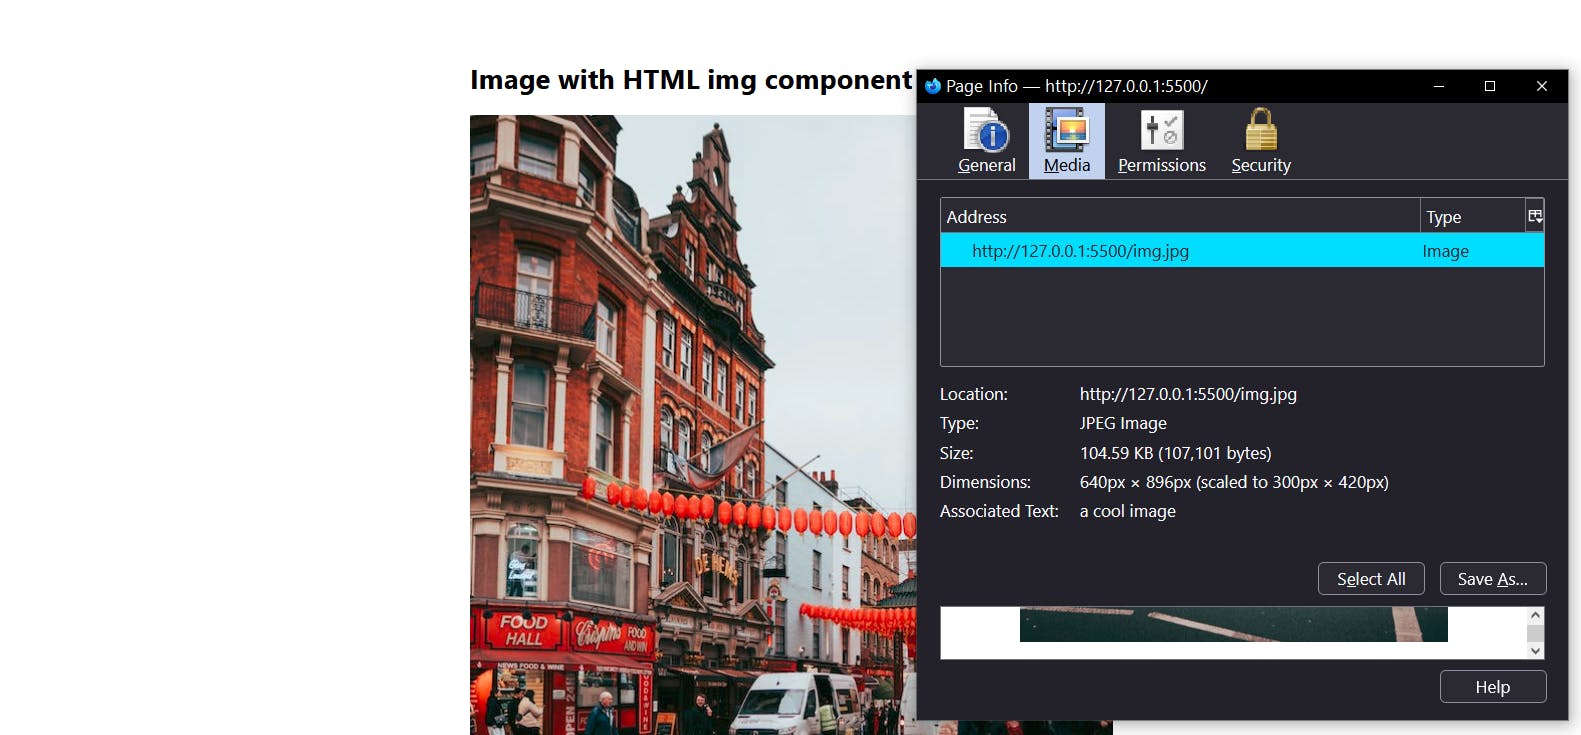 An image showing the size of an image with default HTML.